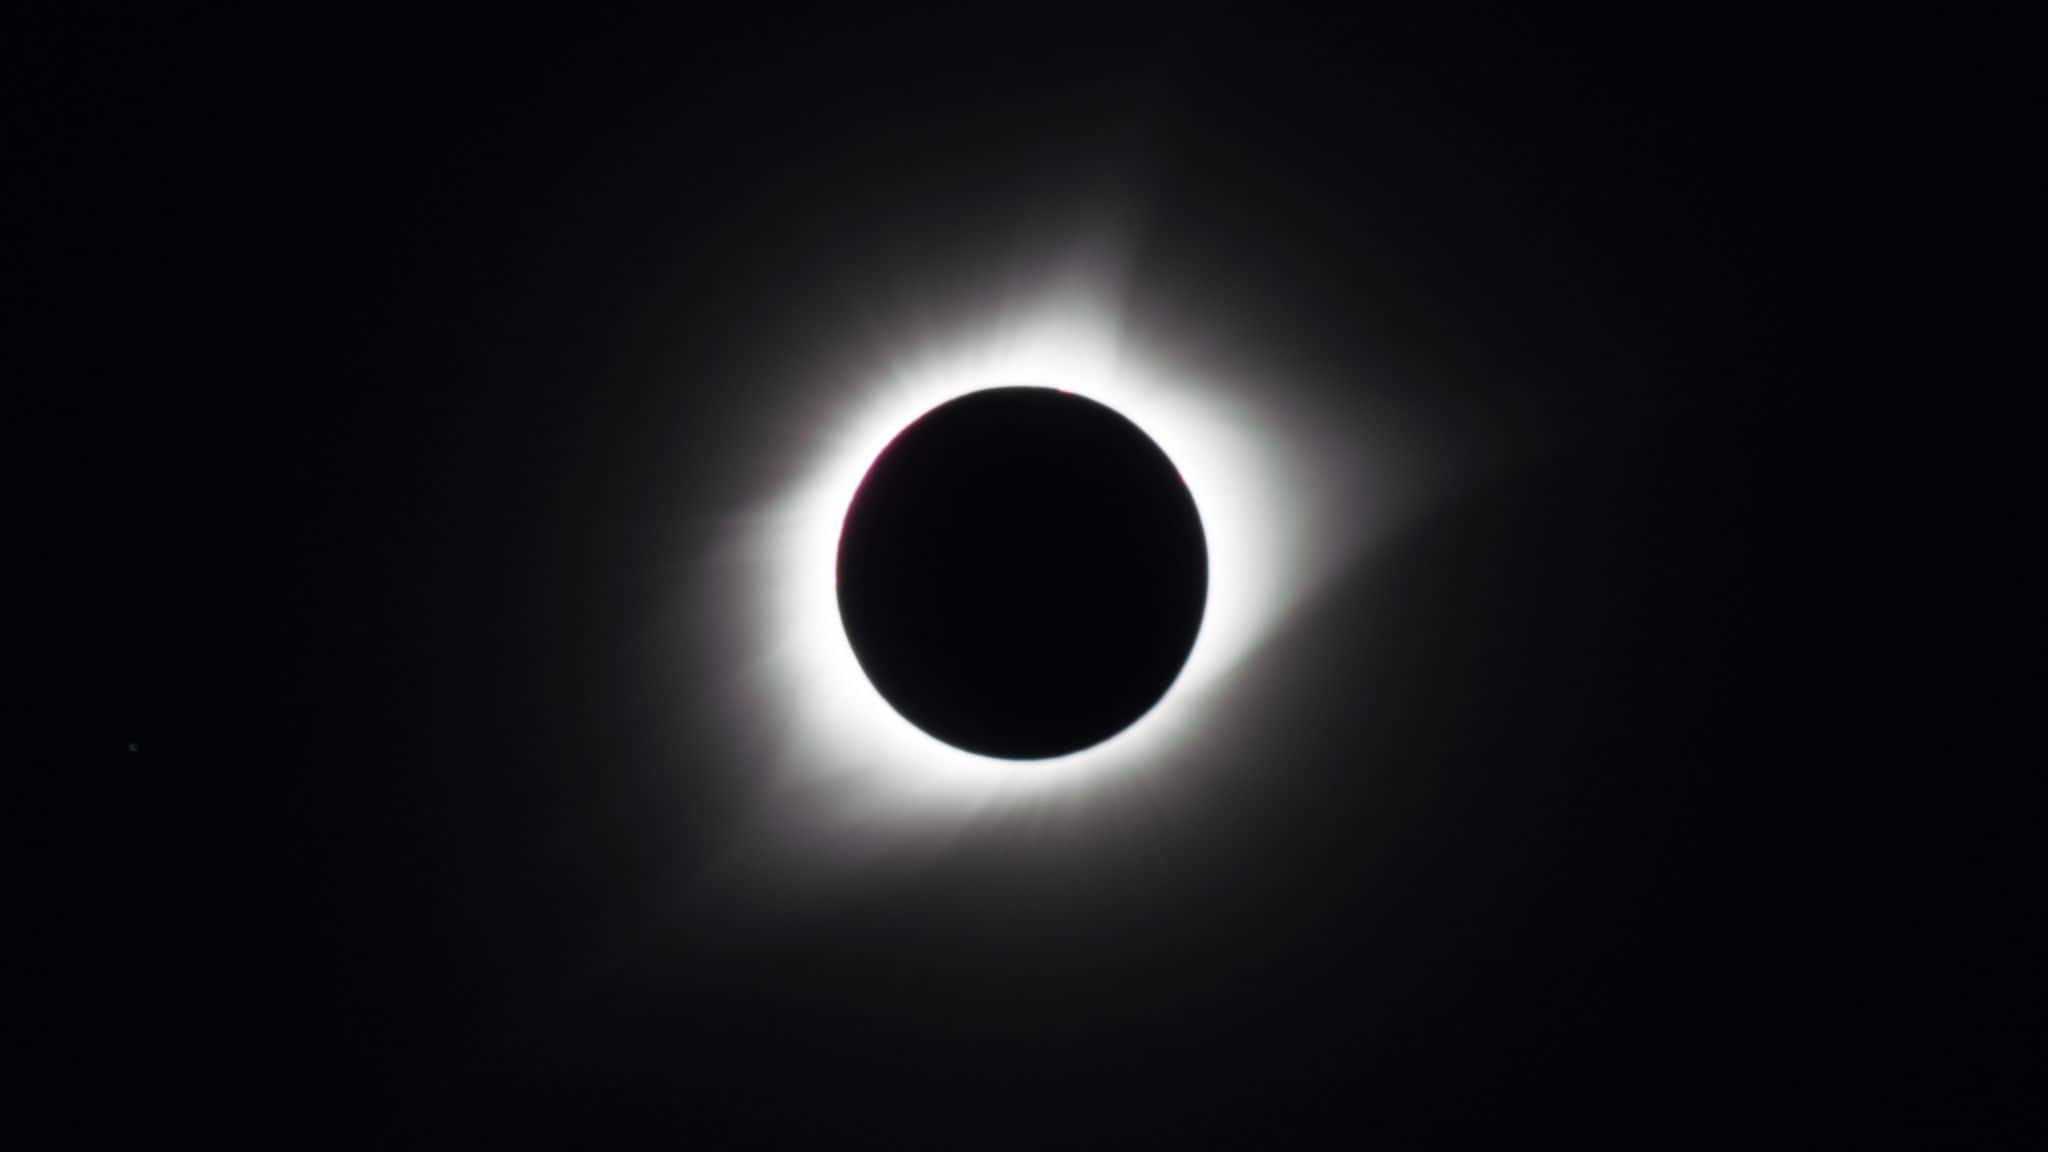 Best image of the total solar eclipse Washington Post